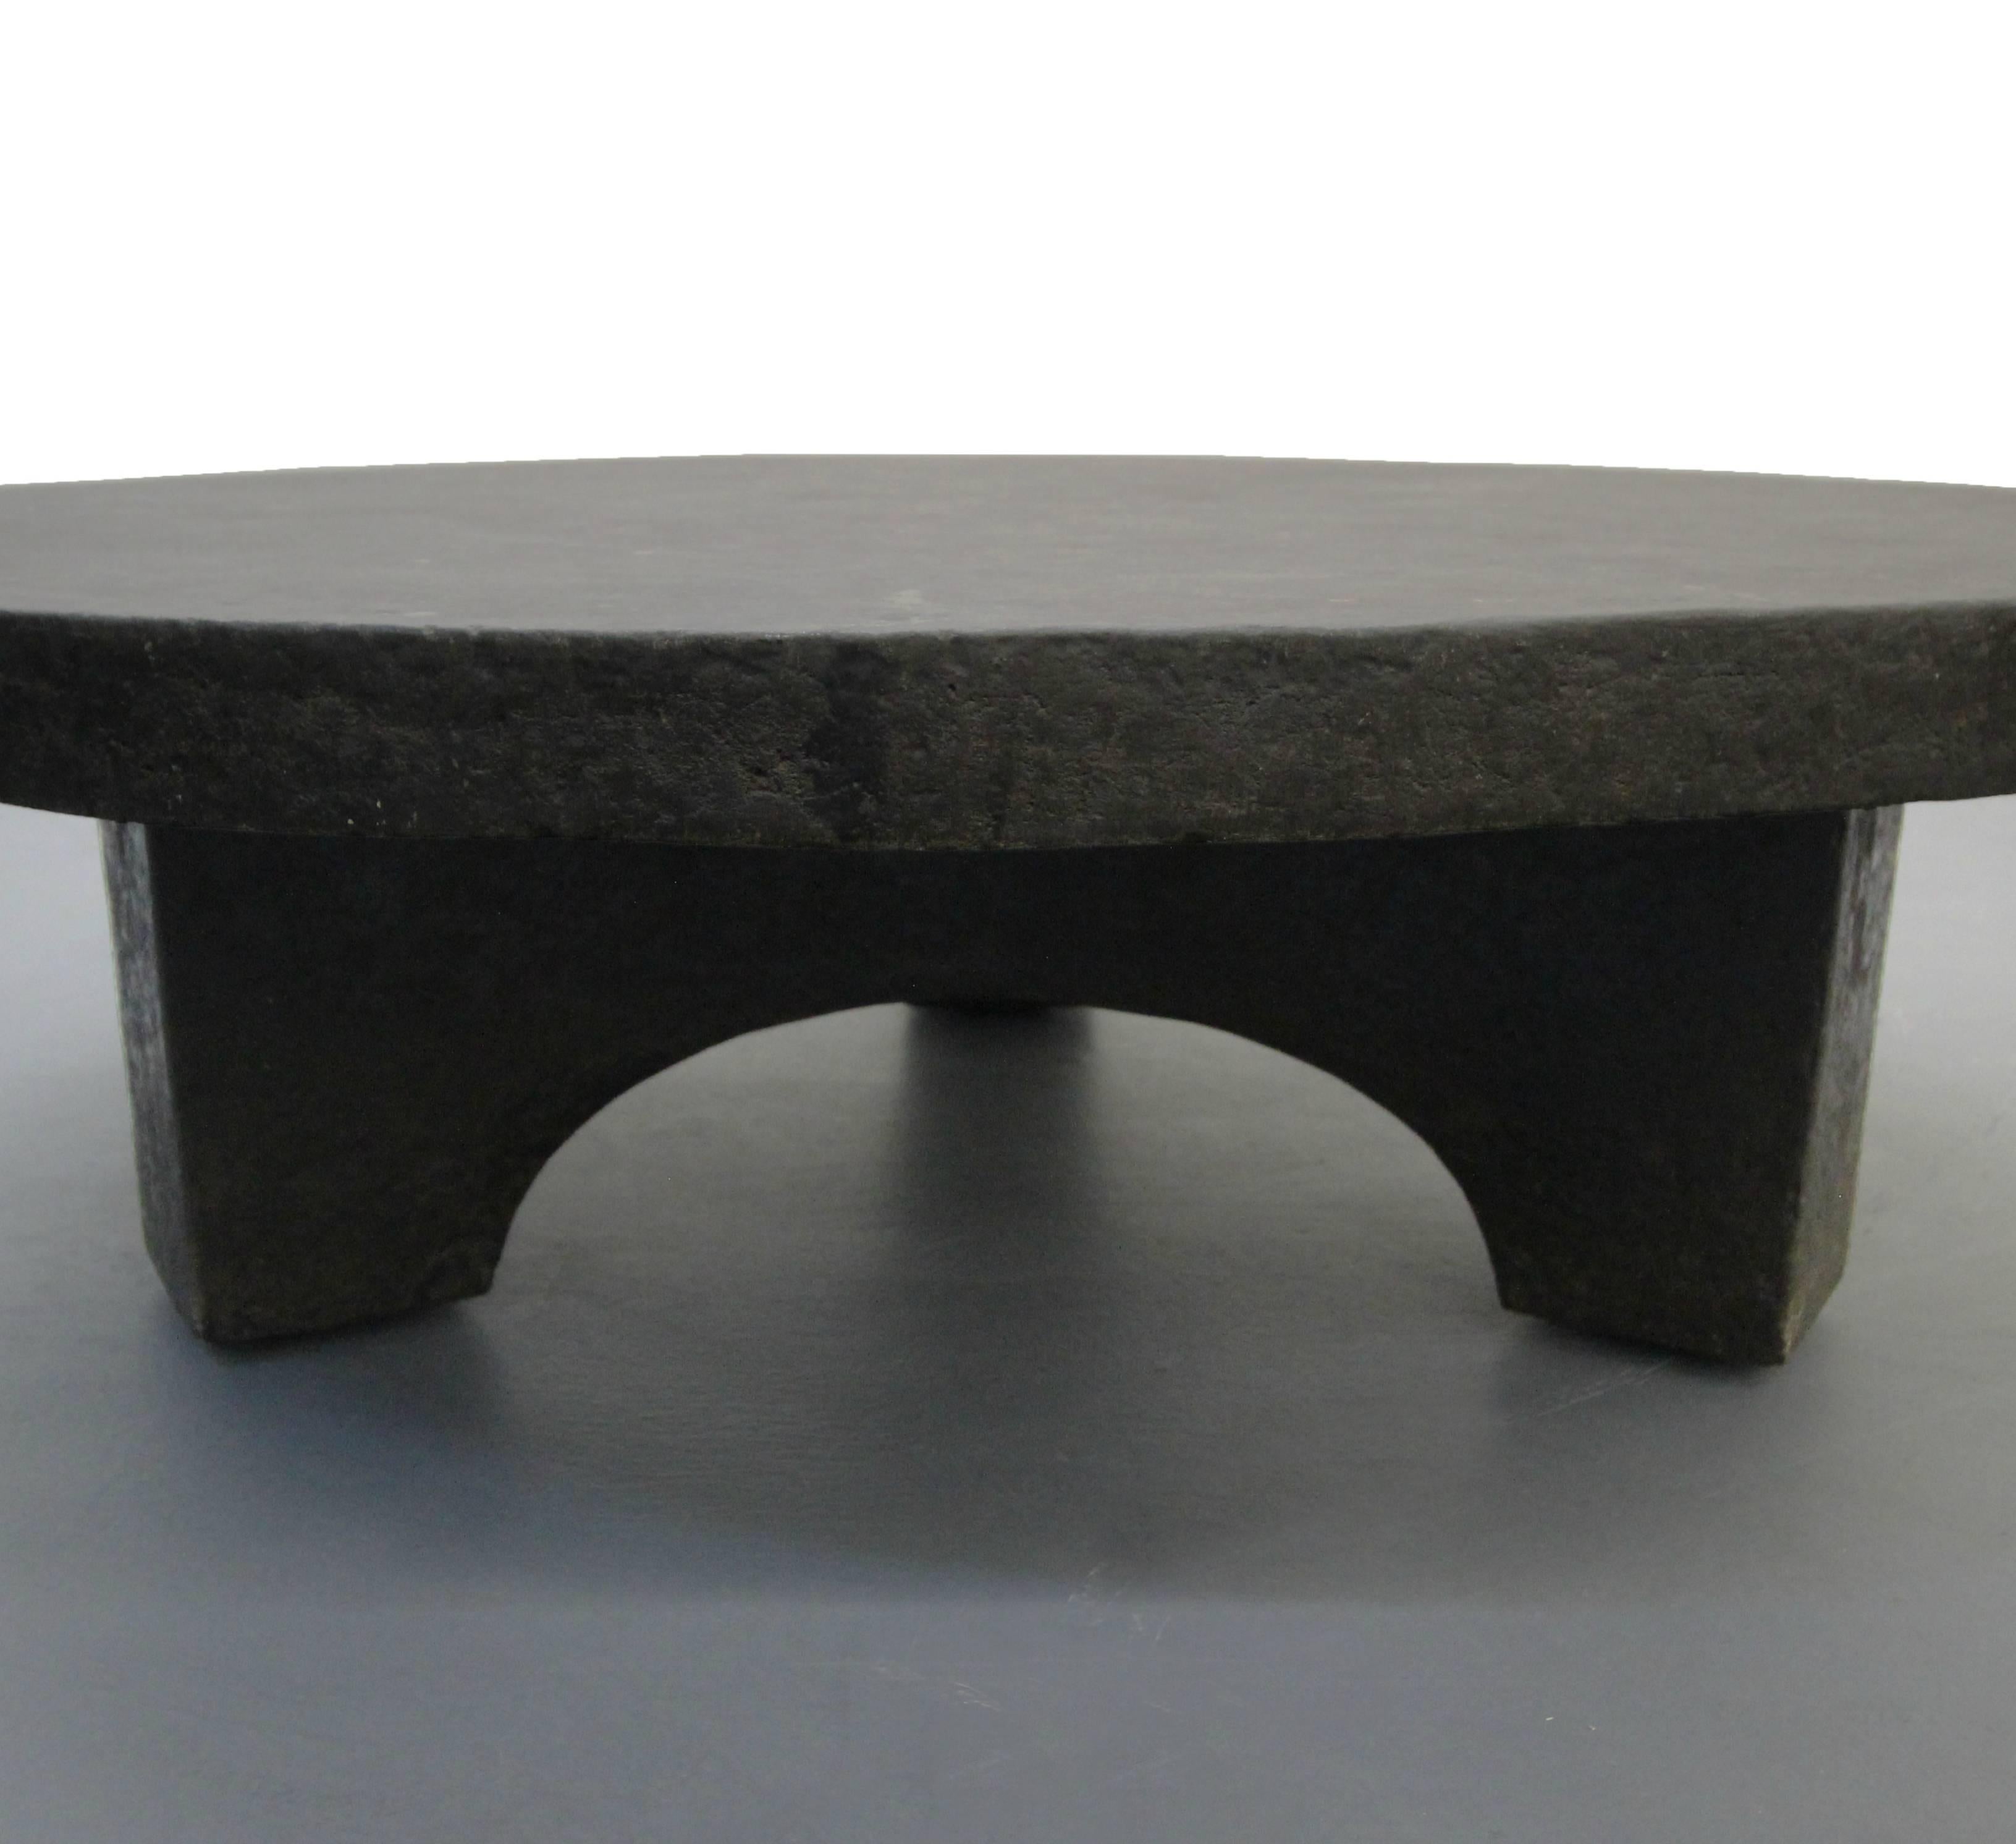 This coffee table has the most amazing Minimalist, organic look. Crafted from a stone and resin, it has the most stunning texture and details. Its the perfect table for an eclectic, Minimalist or even Industrial space. The stone currently has a very